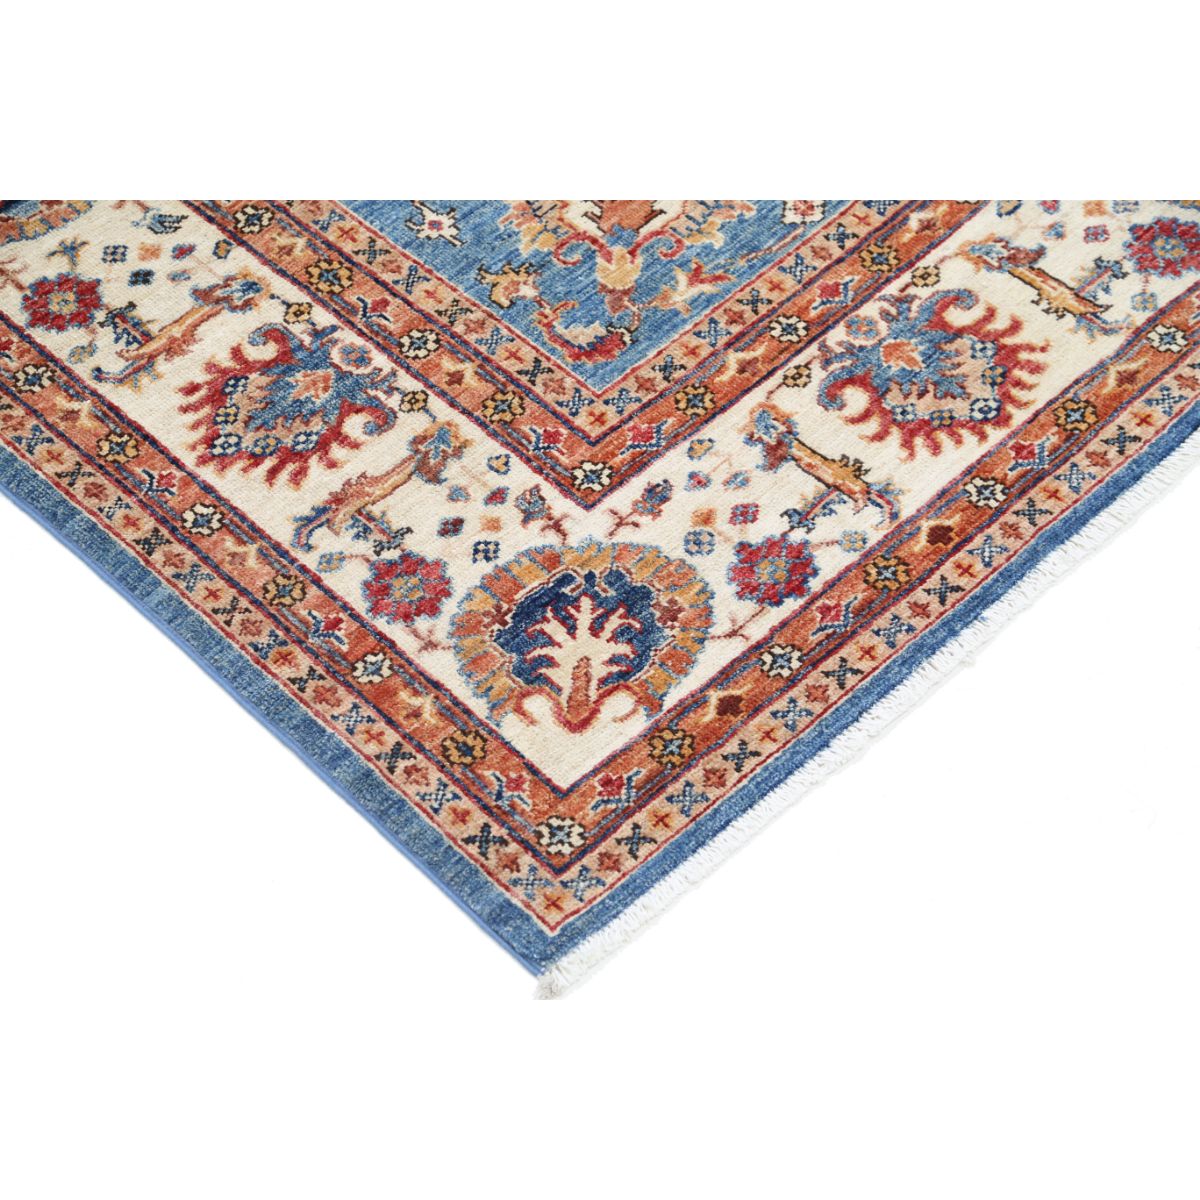 Ziegler 5'9" X 8'0" Wool Hand-Knotted Rug